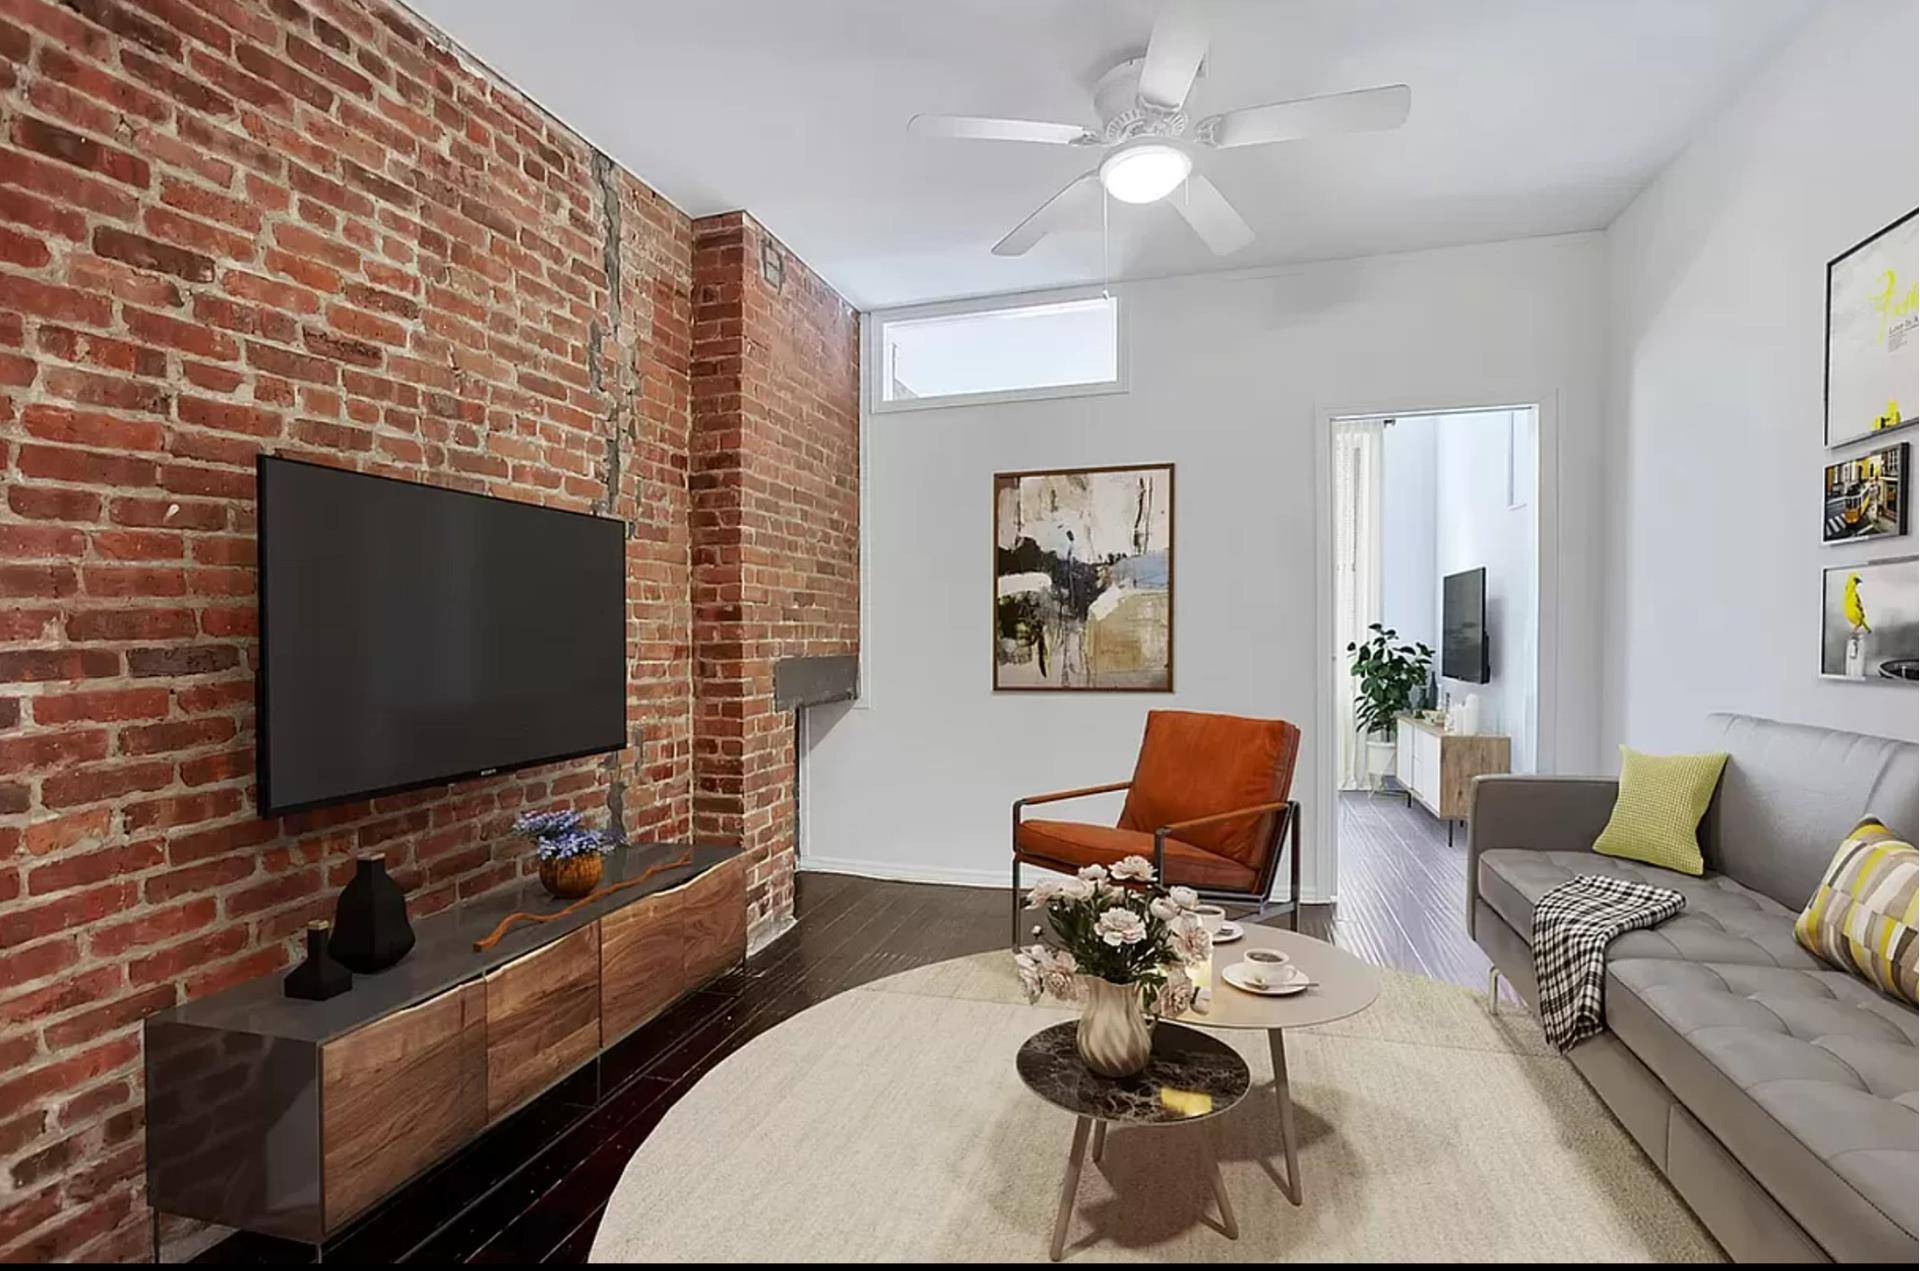 LIGHT, BRIGHT amp ; CHIC 2 Bedroom apartment in Pre War Boutique Rental Building In Hells Kitchen !